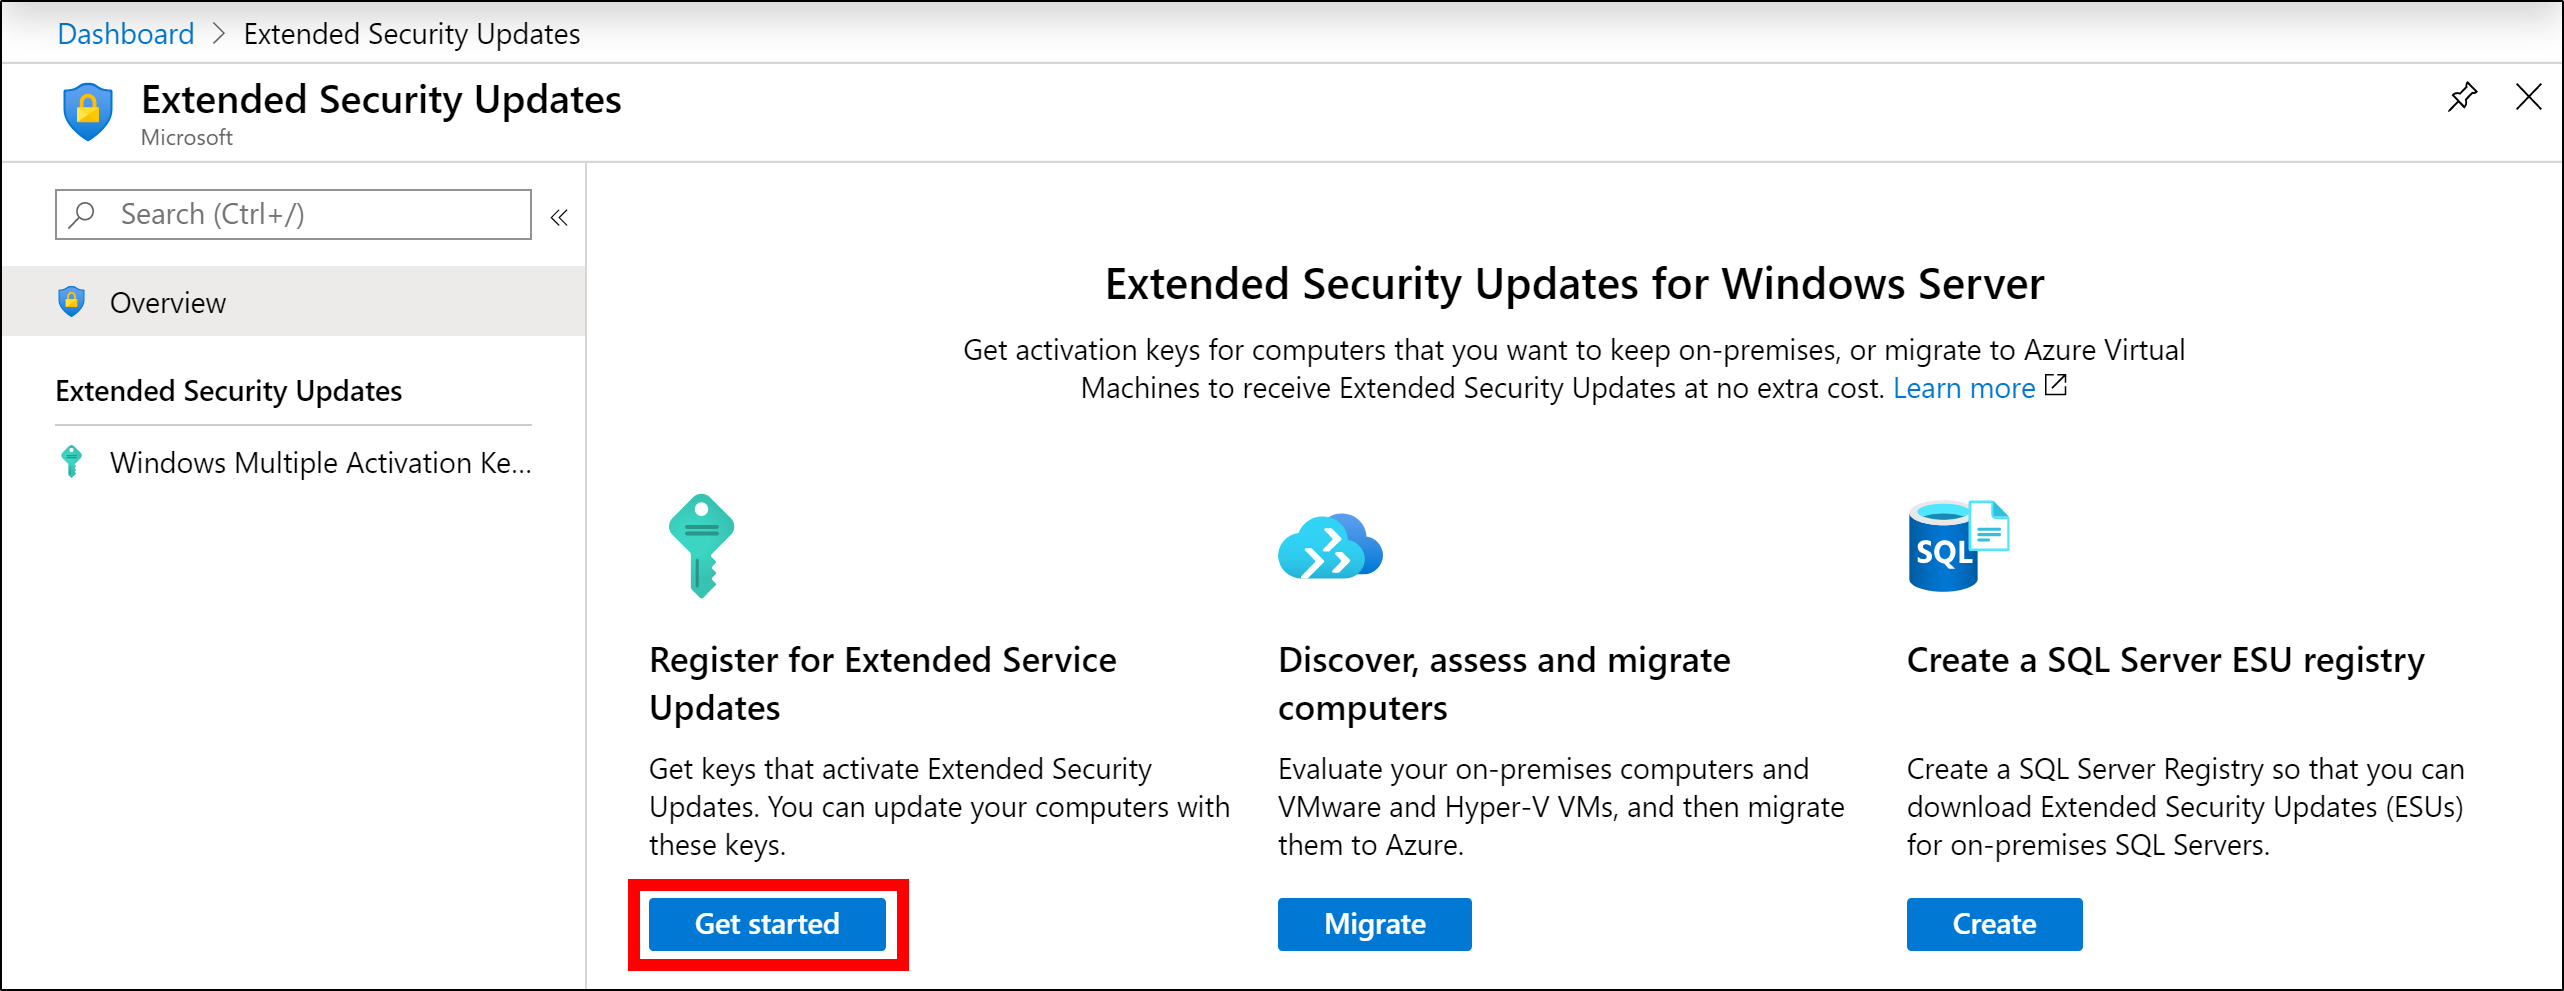 Get started with Extended Security Updates in the Azure Portal